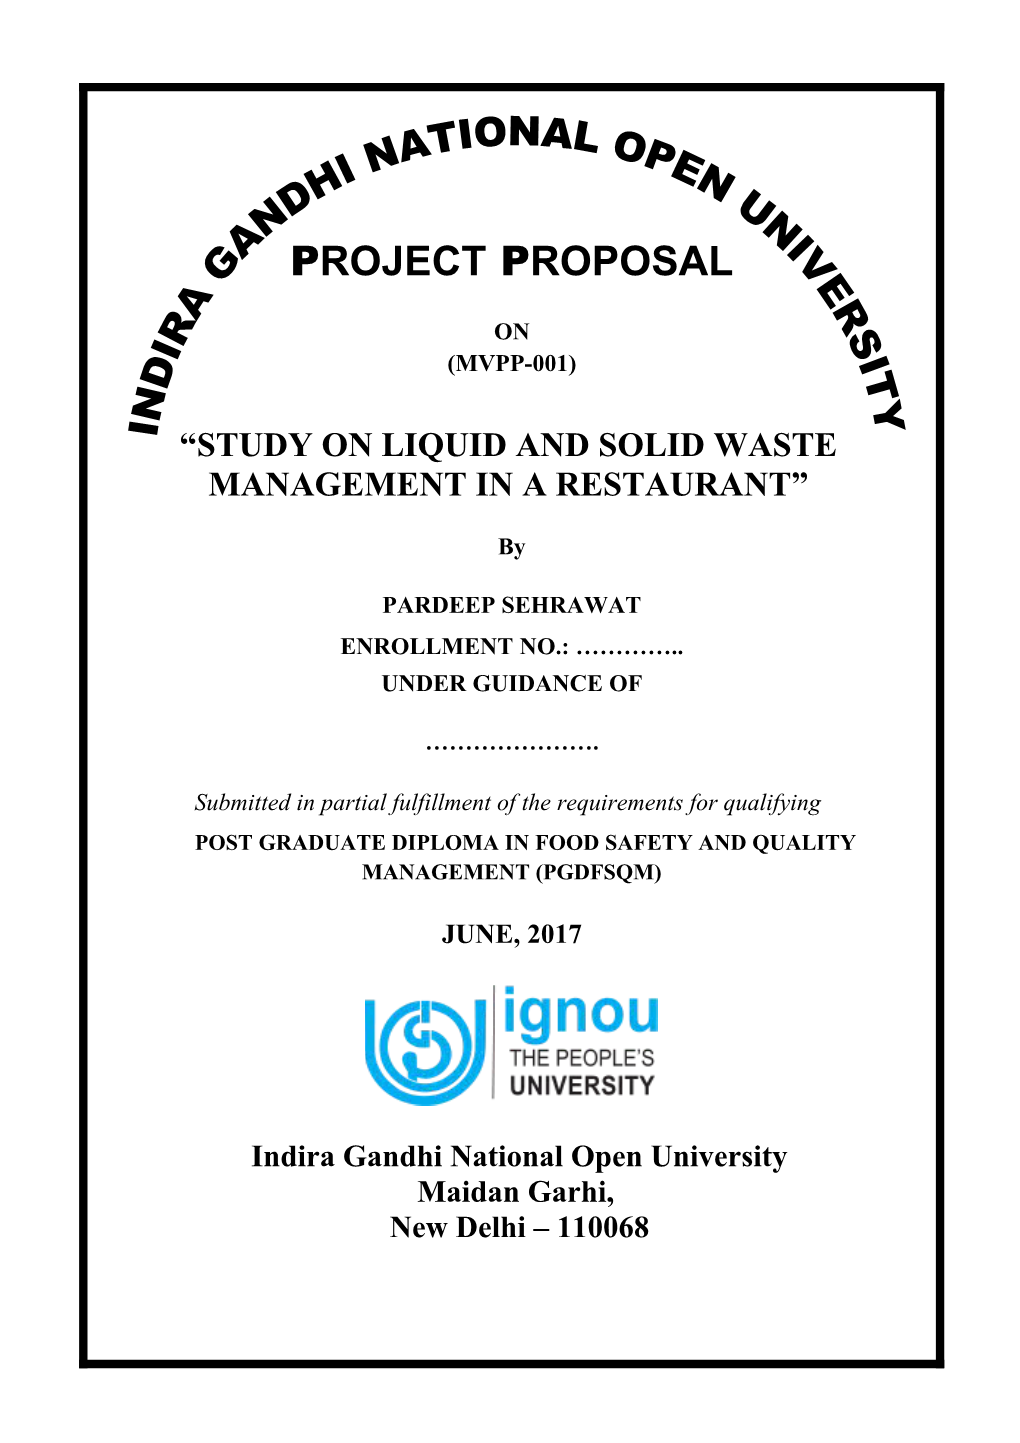 Study on Liquid and Solid Waste Management in a Restaurant